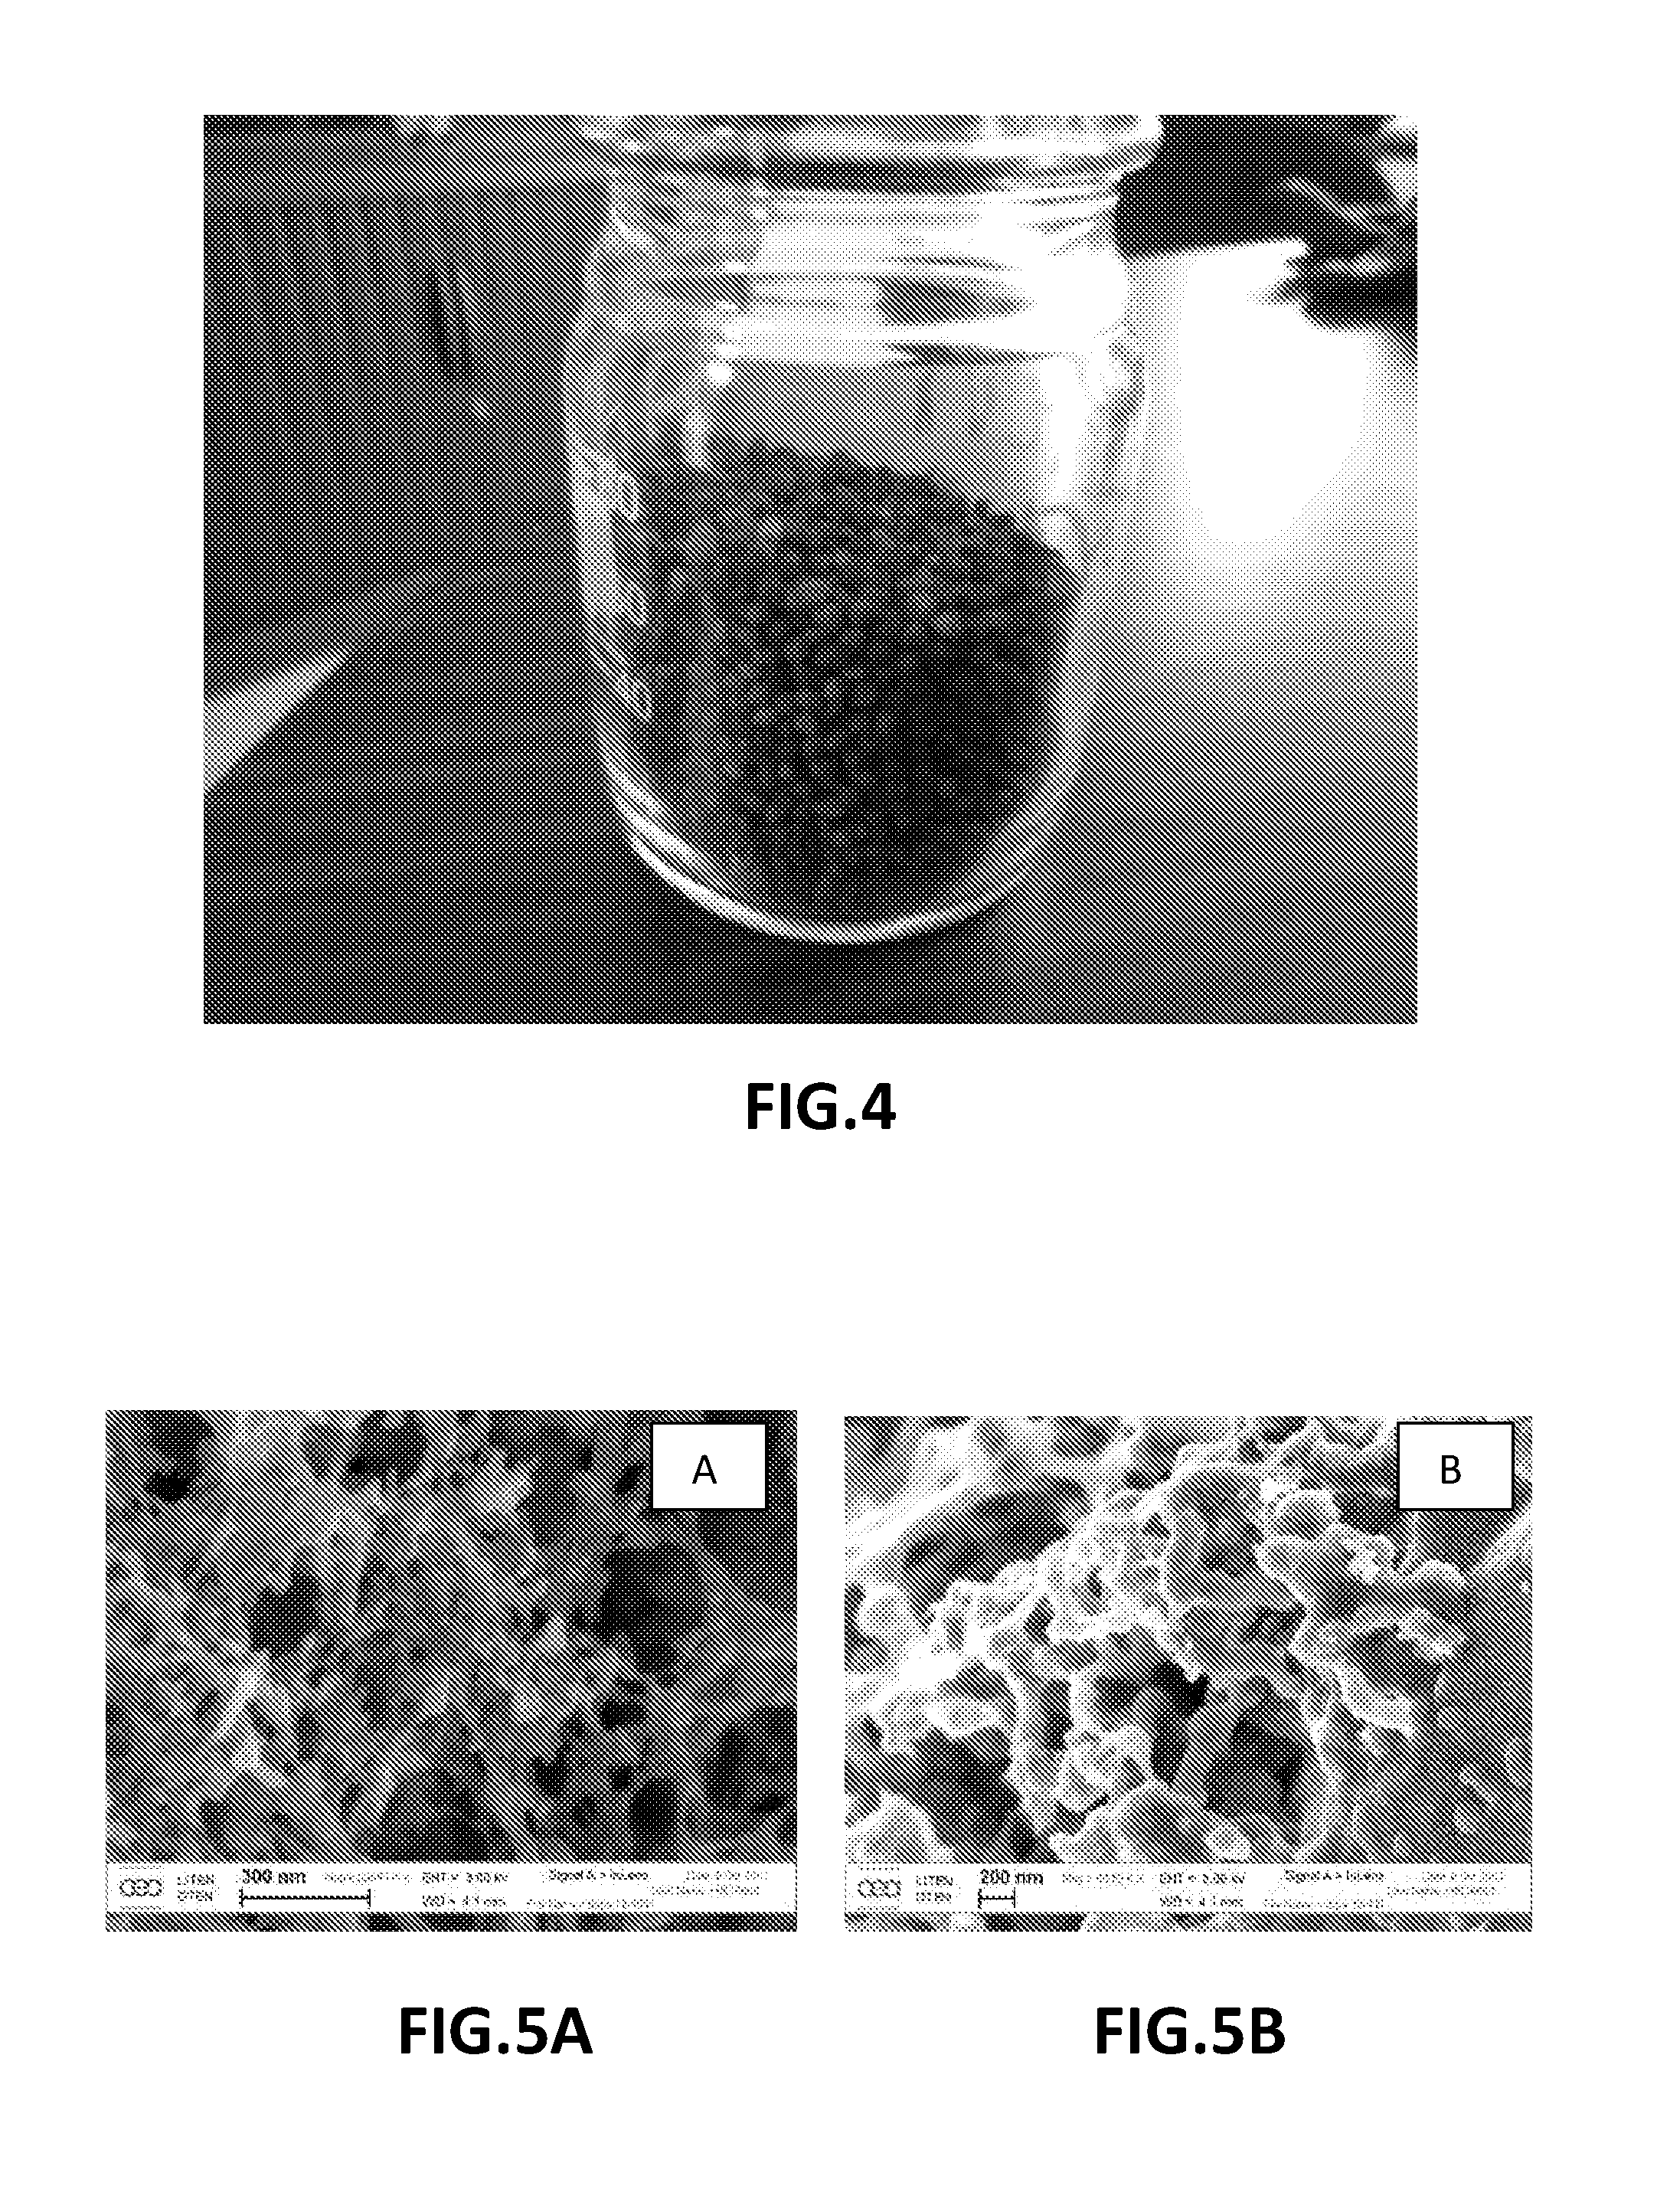 Method for preparing a silicon/carbon composite material, material so prepared, and electrode, in particular negative electrode, comprising said material